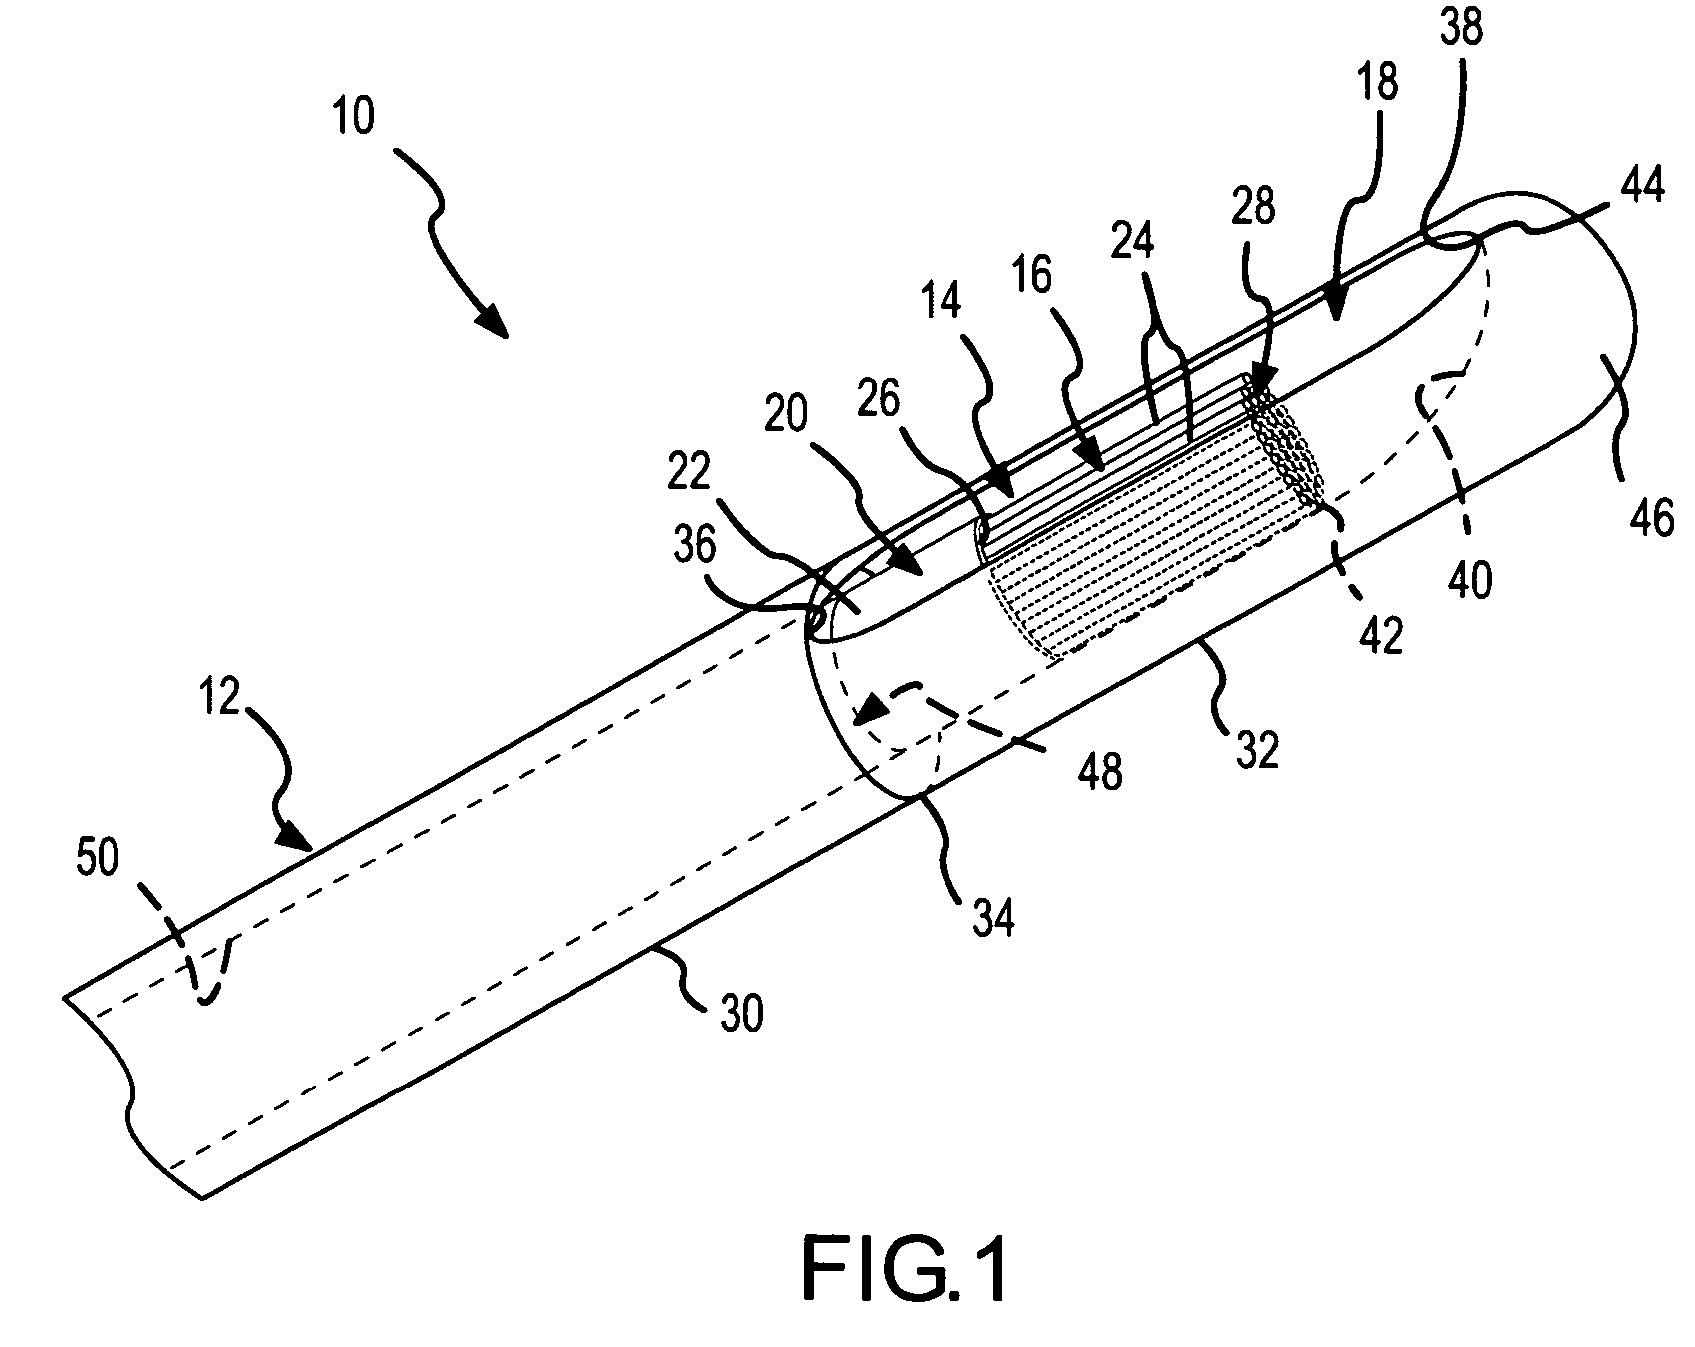 Side-port sheath for catheter placement and translation